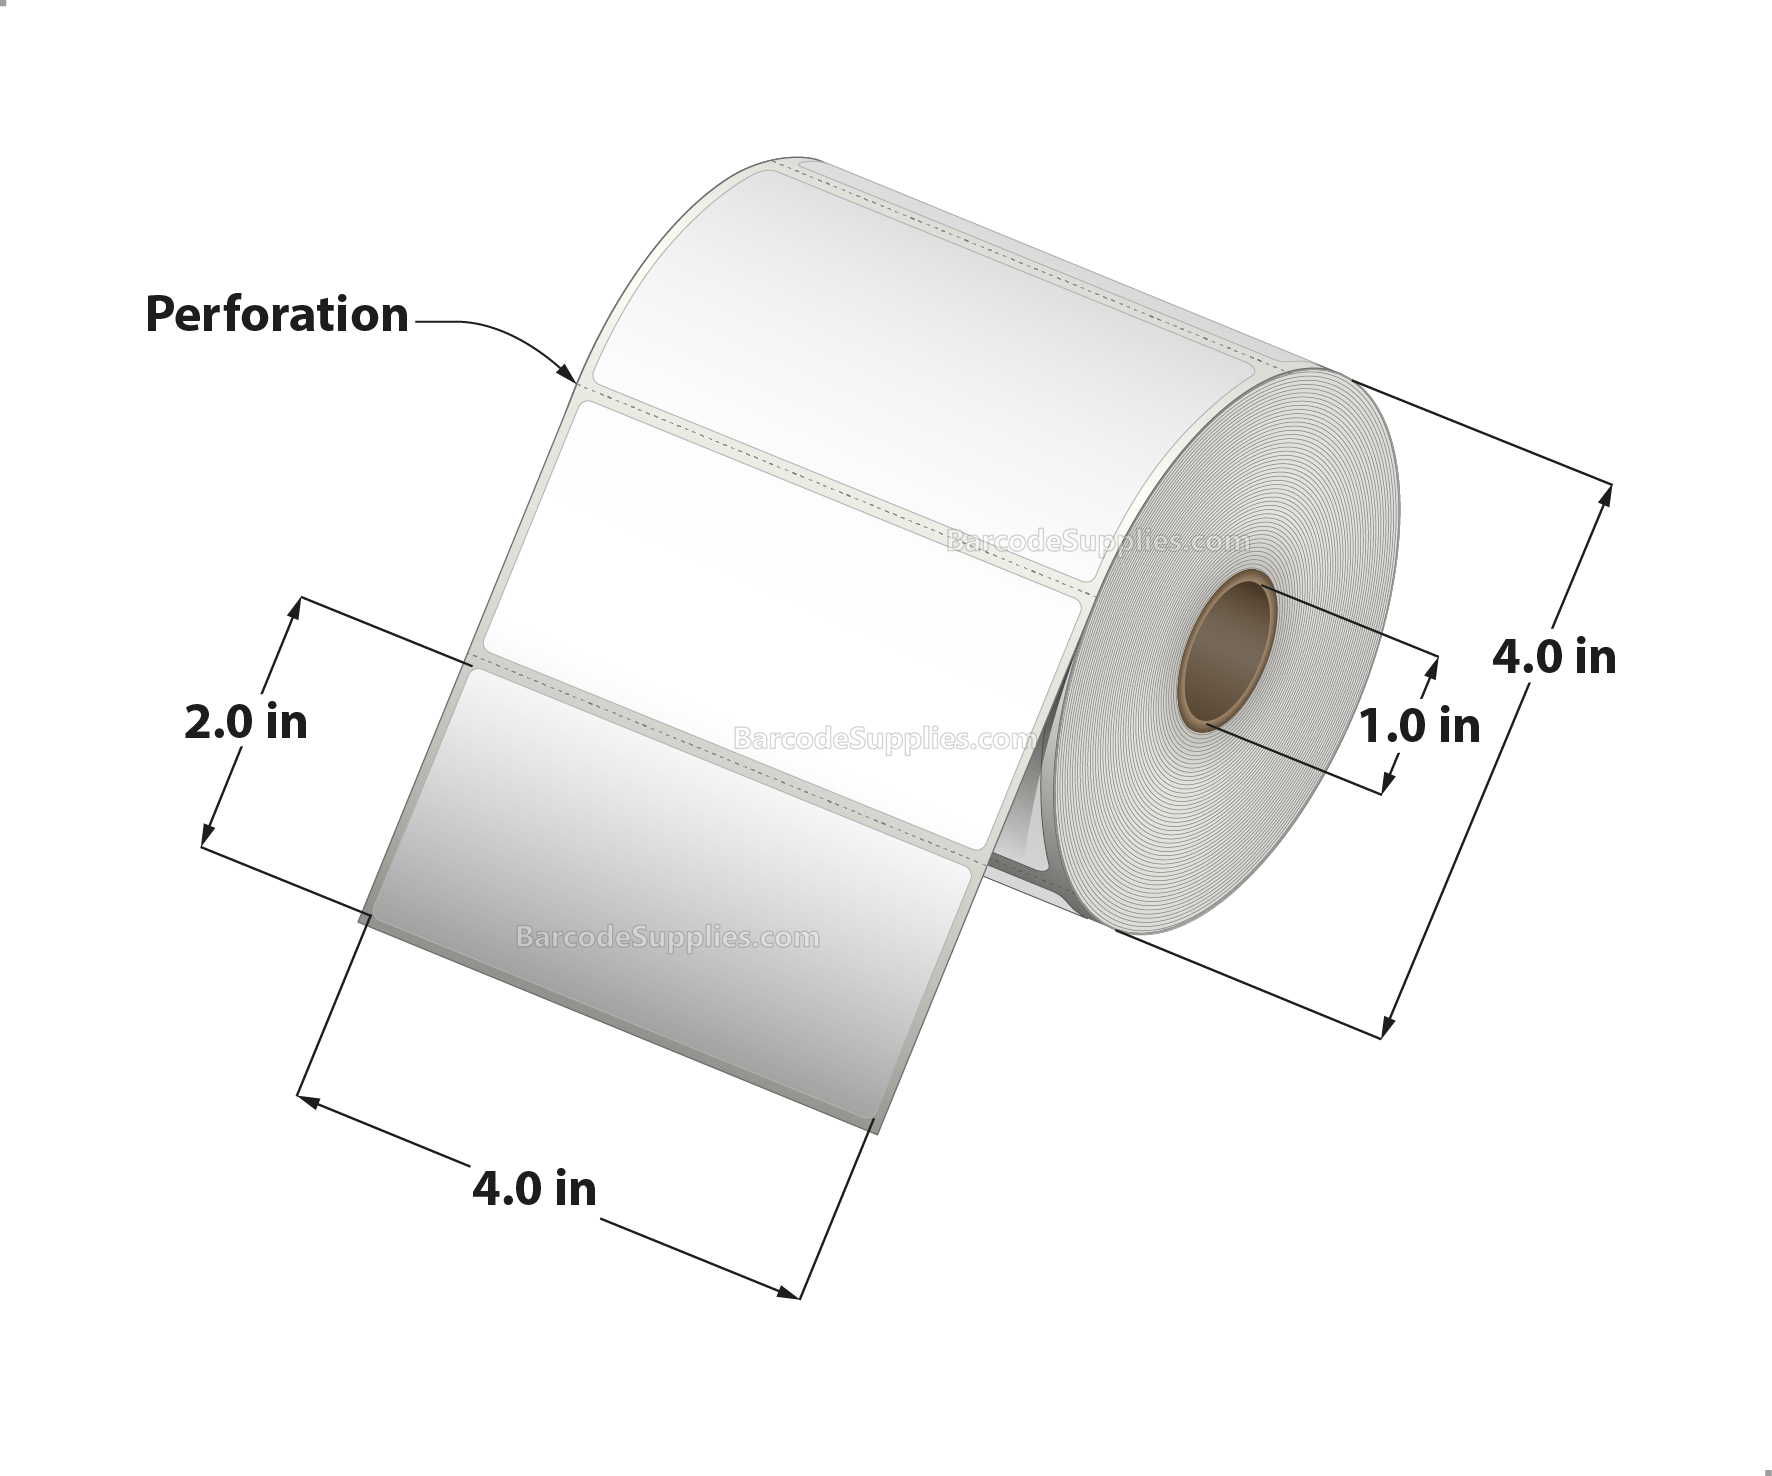 4 x 2 Thermal Transfer White Labels With Rubber Adhesive - Perforated - 735 Labels Per Roll - Carton Of 12 Rolls - 8820 Labels Total - MPN: RTT4-400200-1P